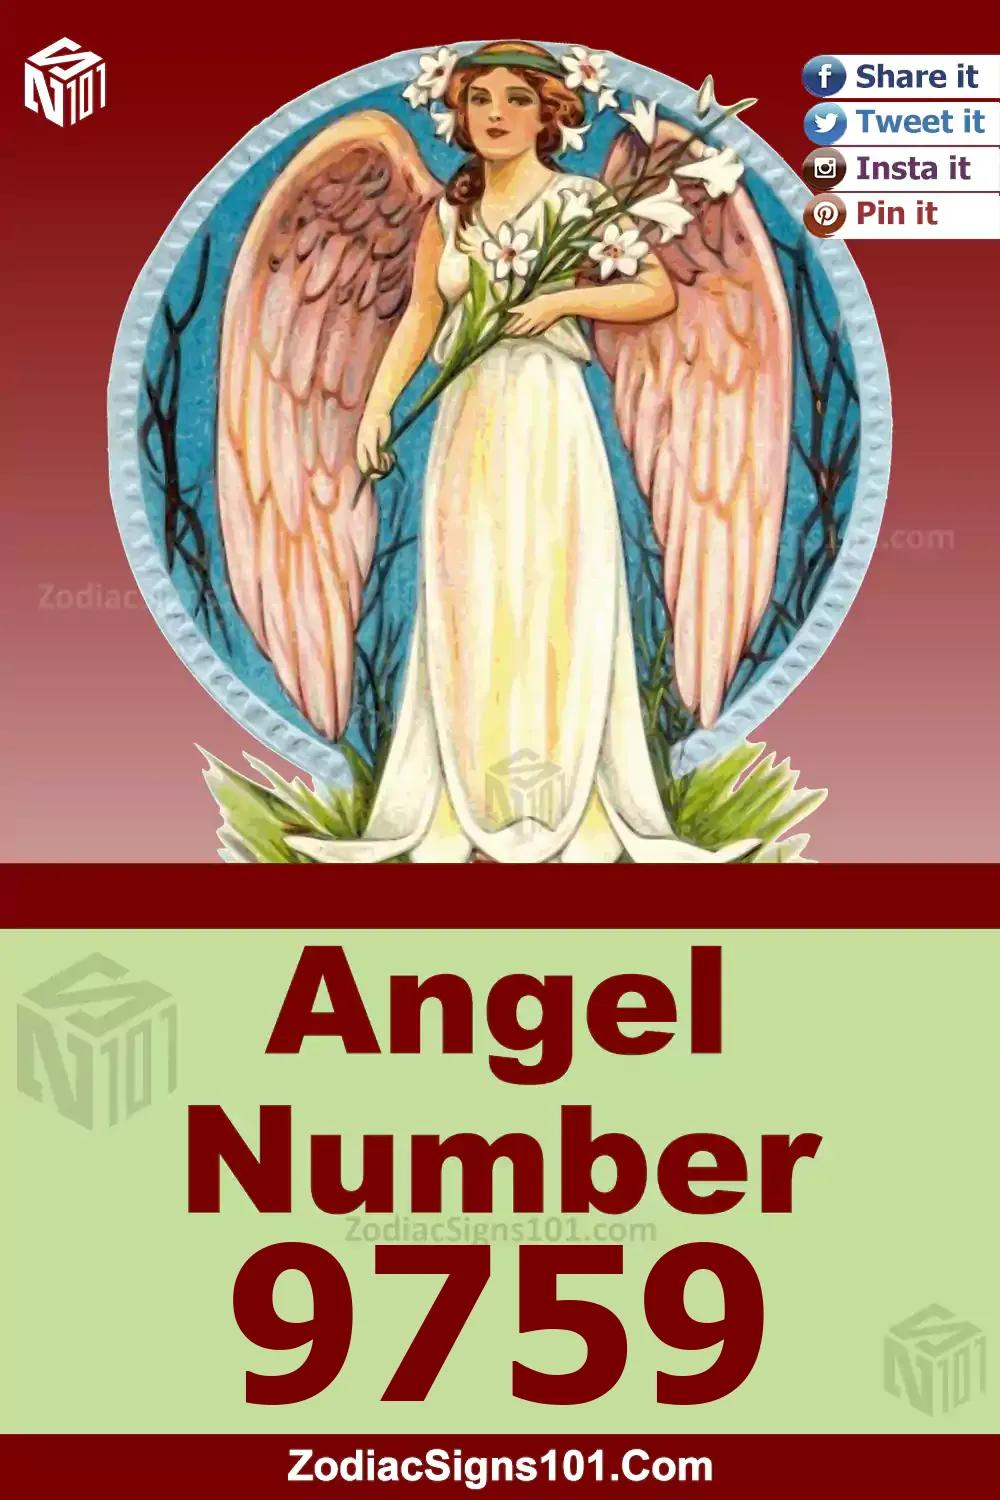 9759 Angel Number Meaning